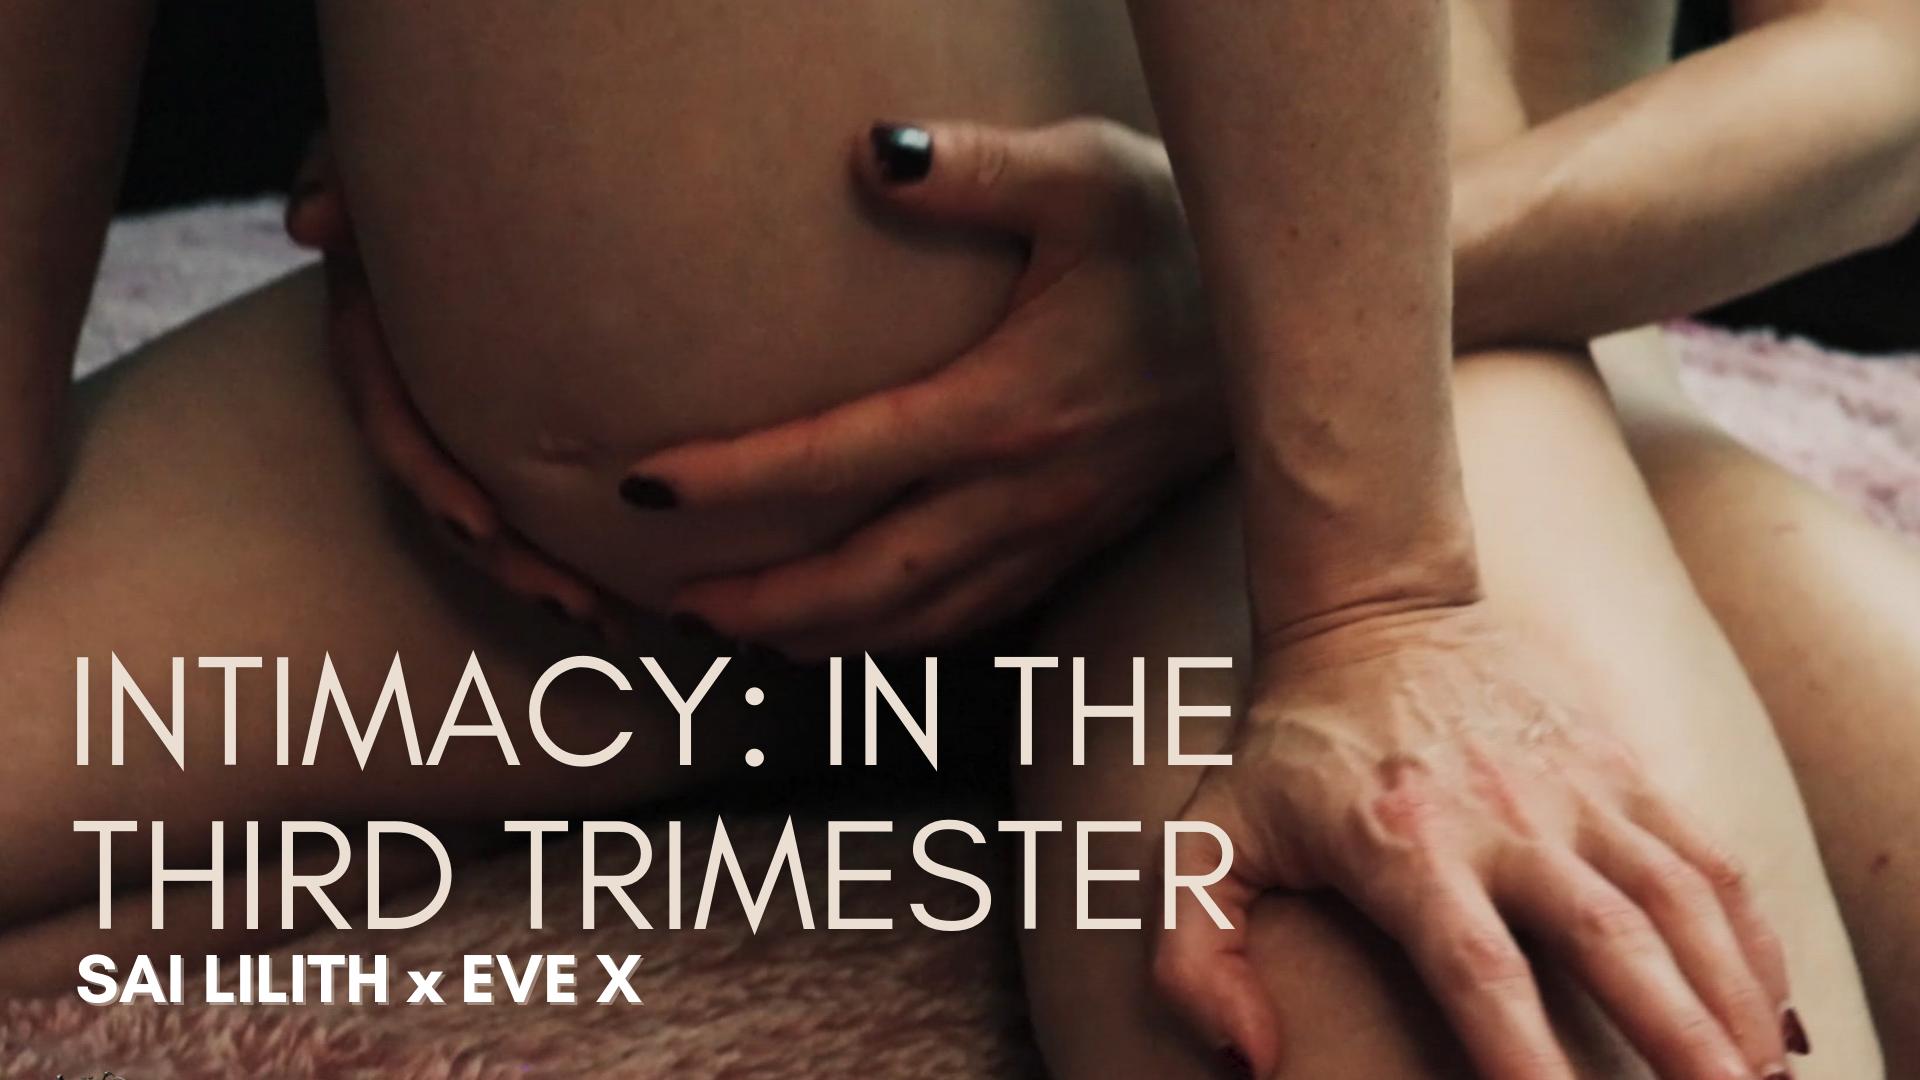 Intimacy: In the Third Trimester